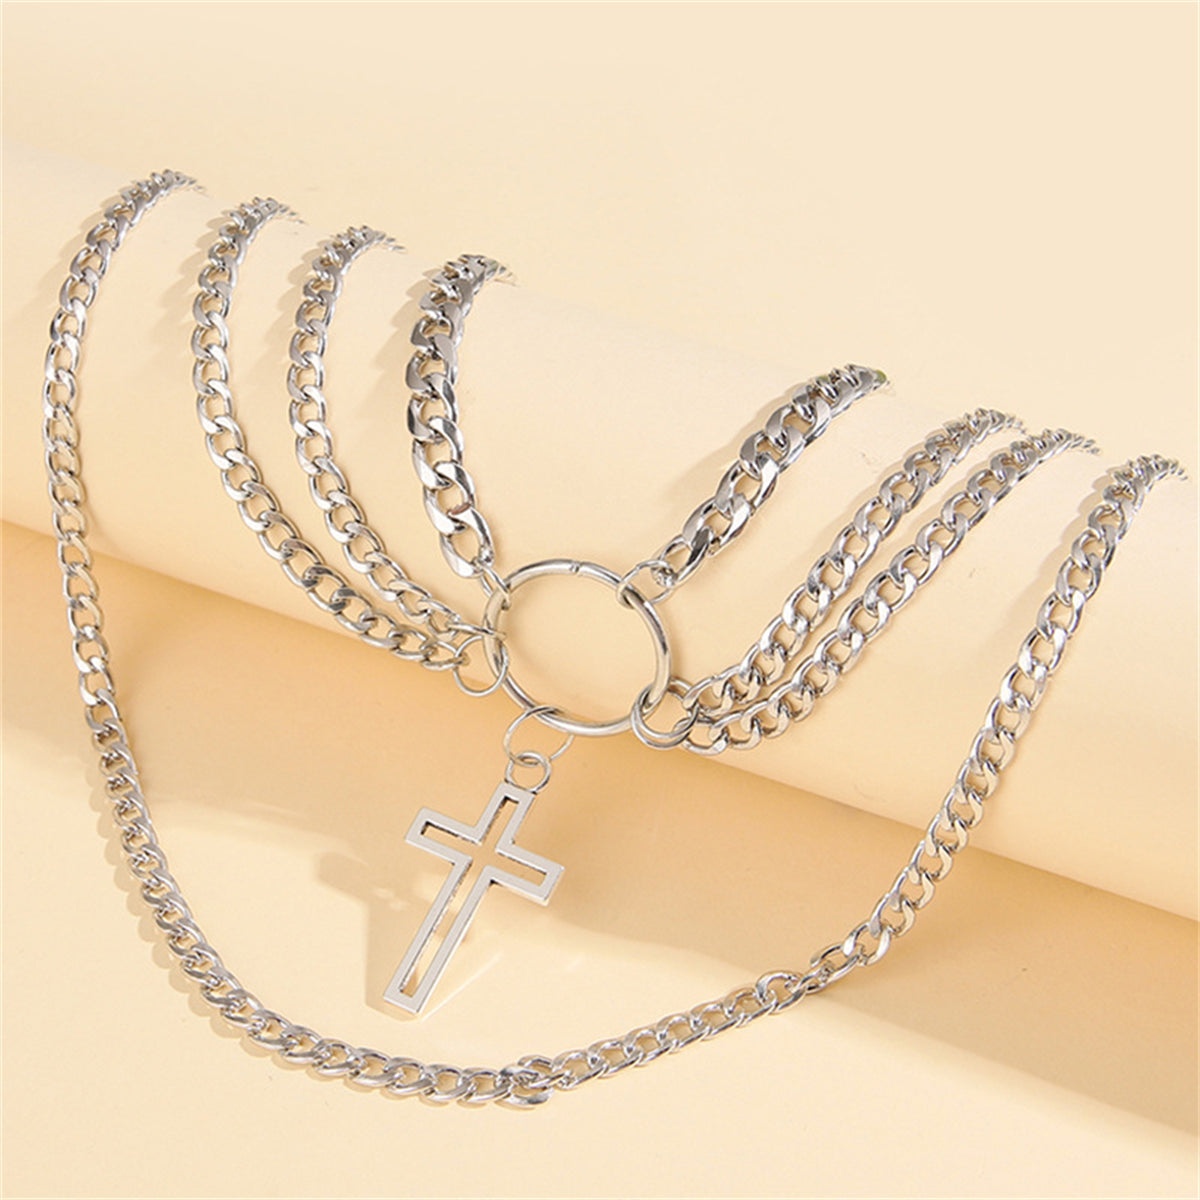 Silver-Plated Cross Layered Pendant Necklace